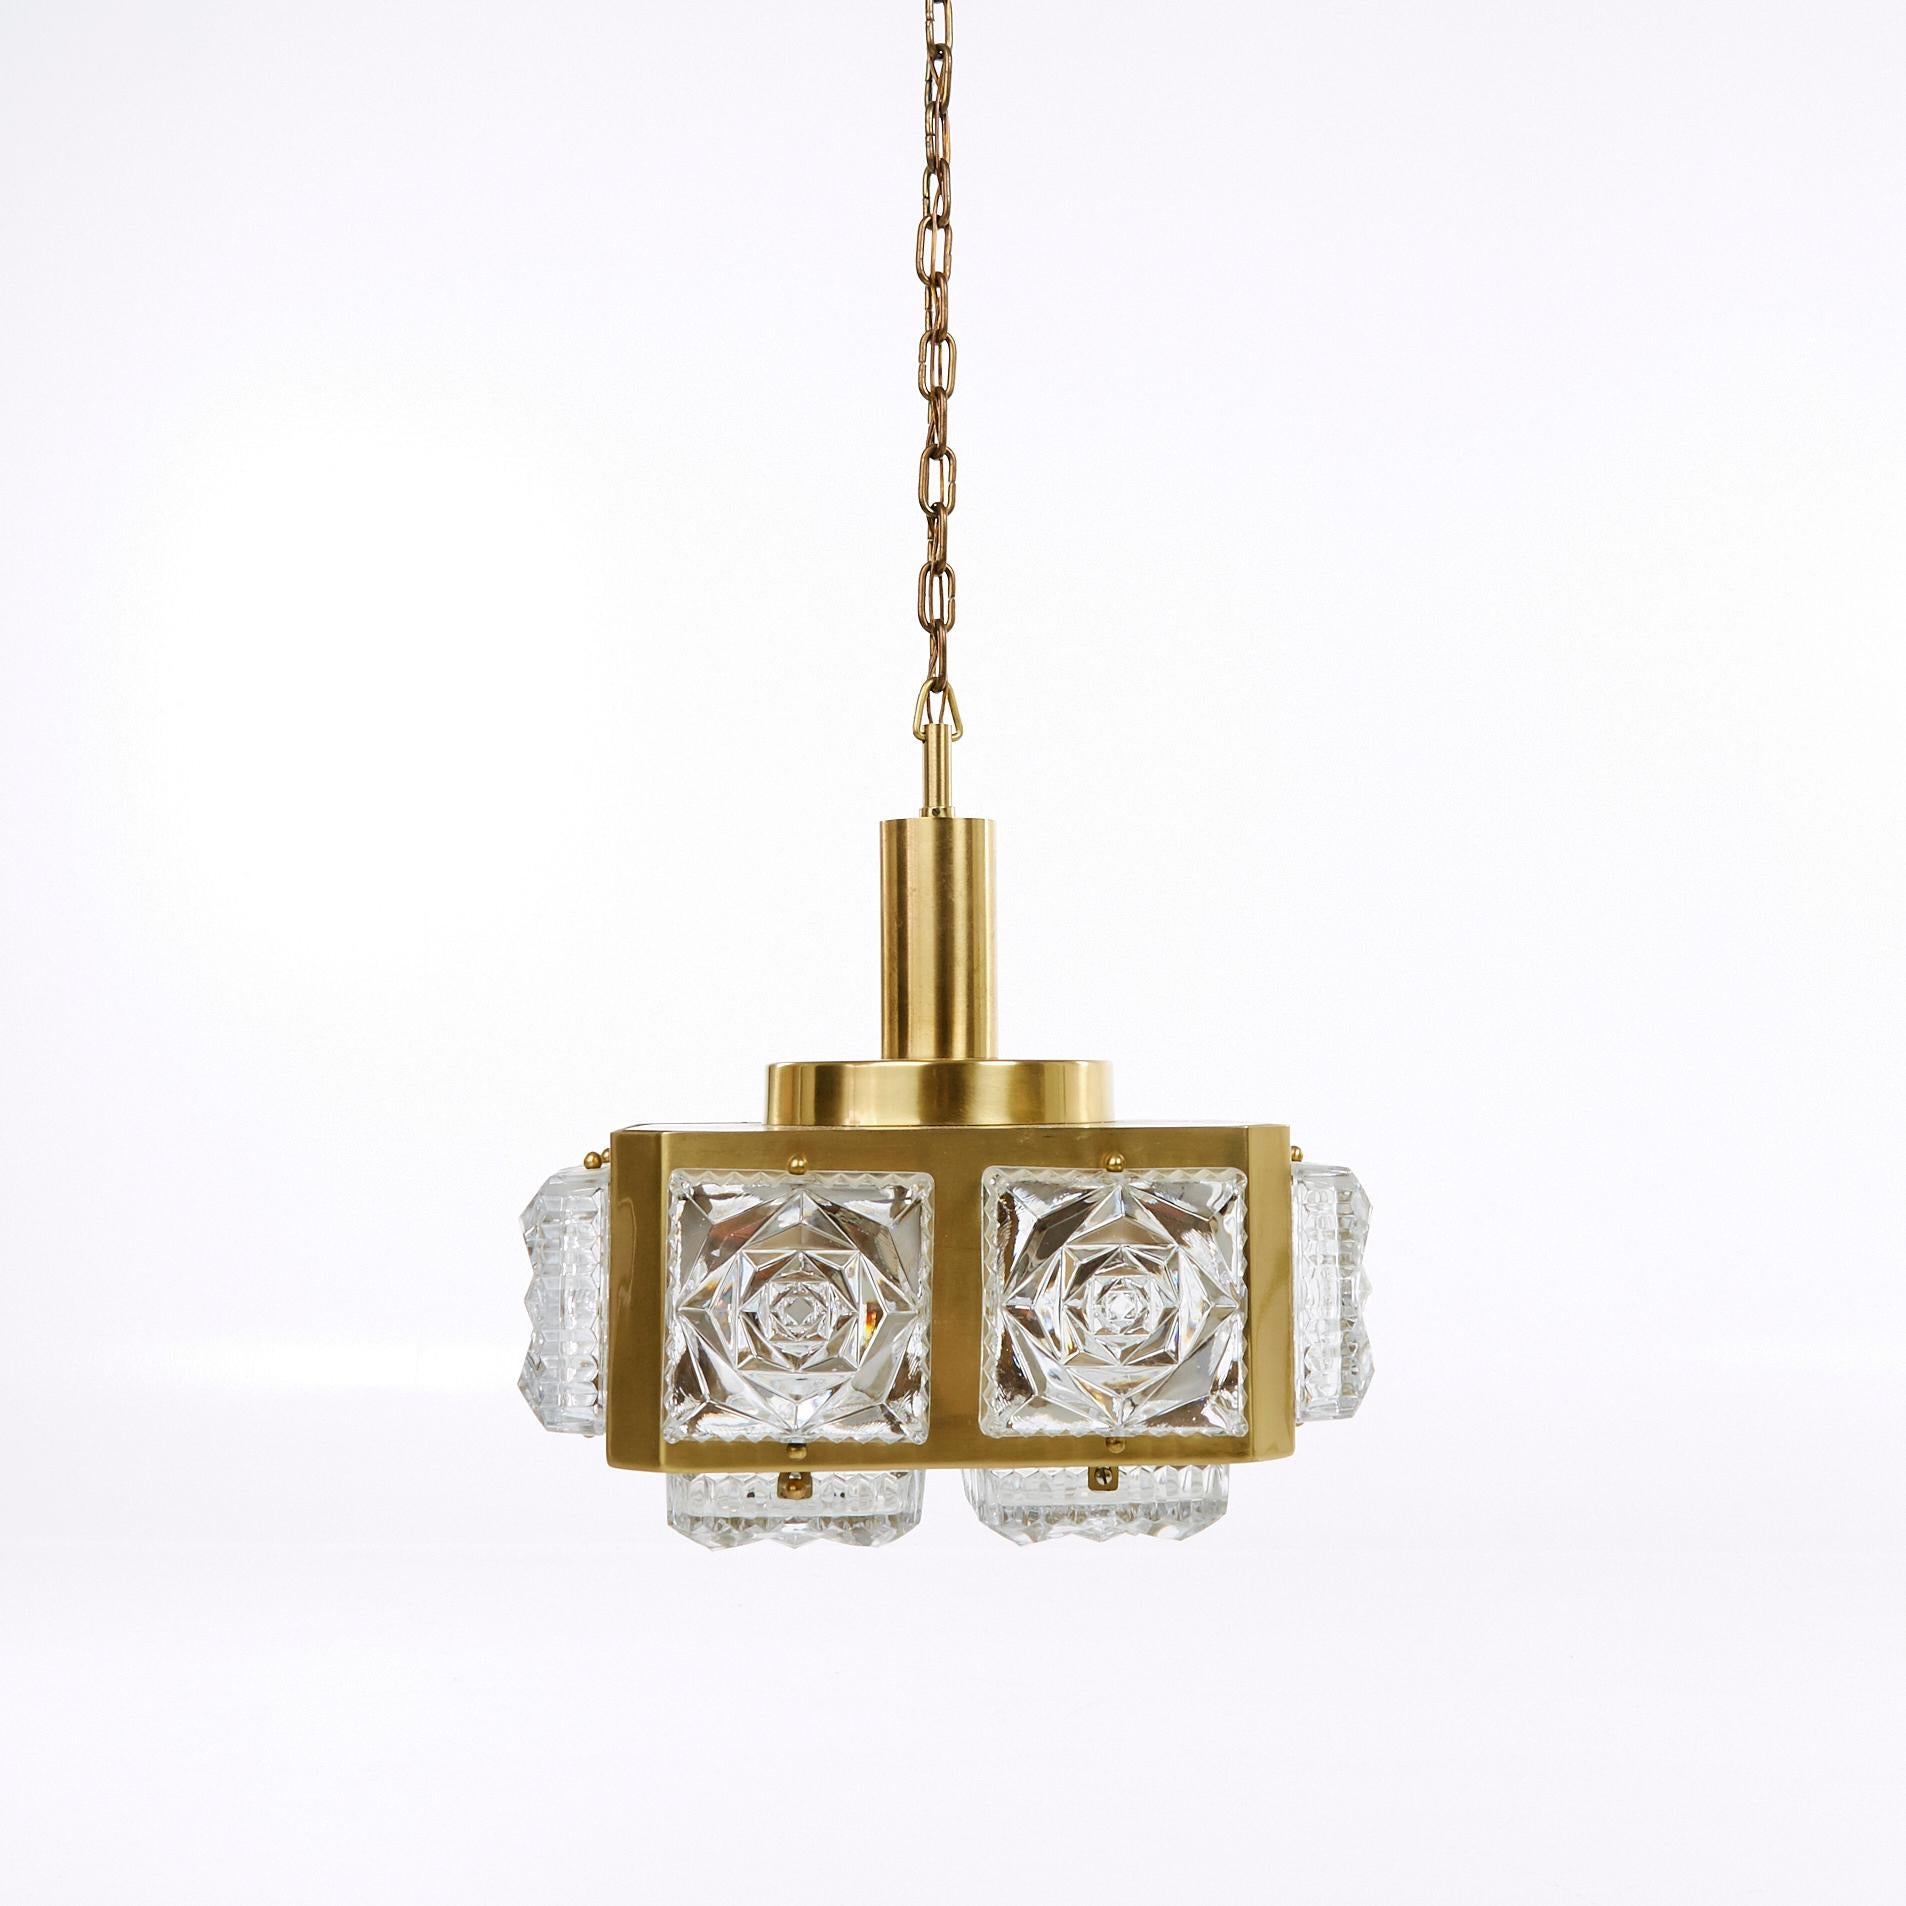 Chandelier by Carl Fagerlund for Orrefors Glassworks In Excellent Condition For Sale In Vienna, AT